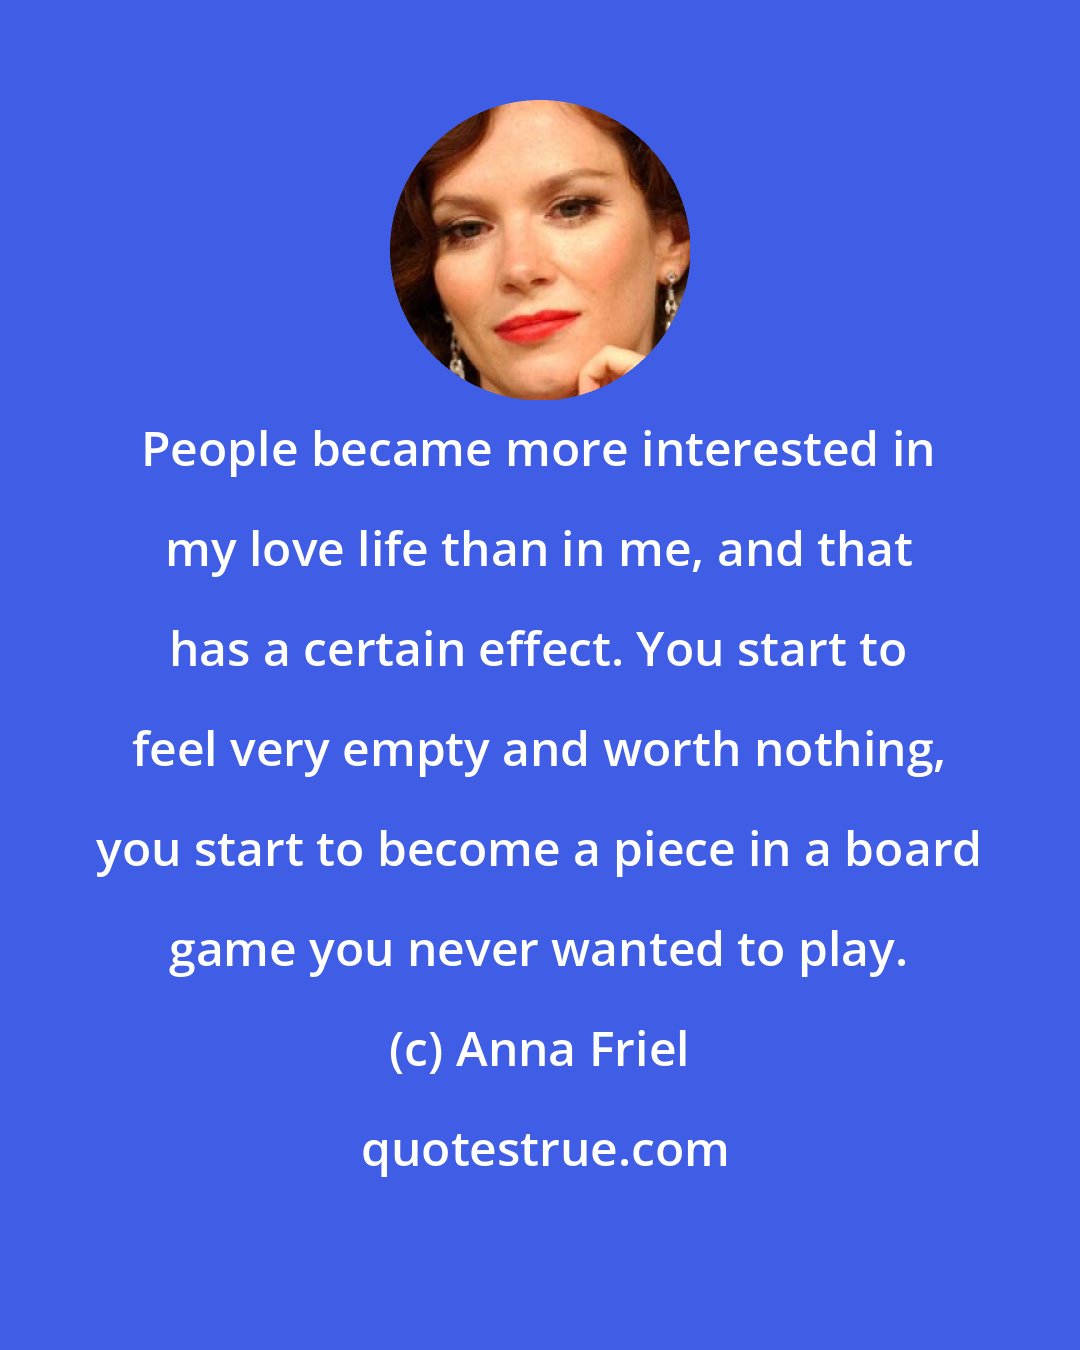 Anna Friel: People became more interested in my love life than in me, and that has a certain effect. You start to feel very empty and worth nothing, you start to become a piece in a board game you never wanted to play.